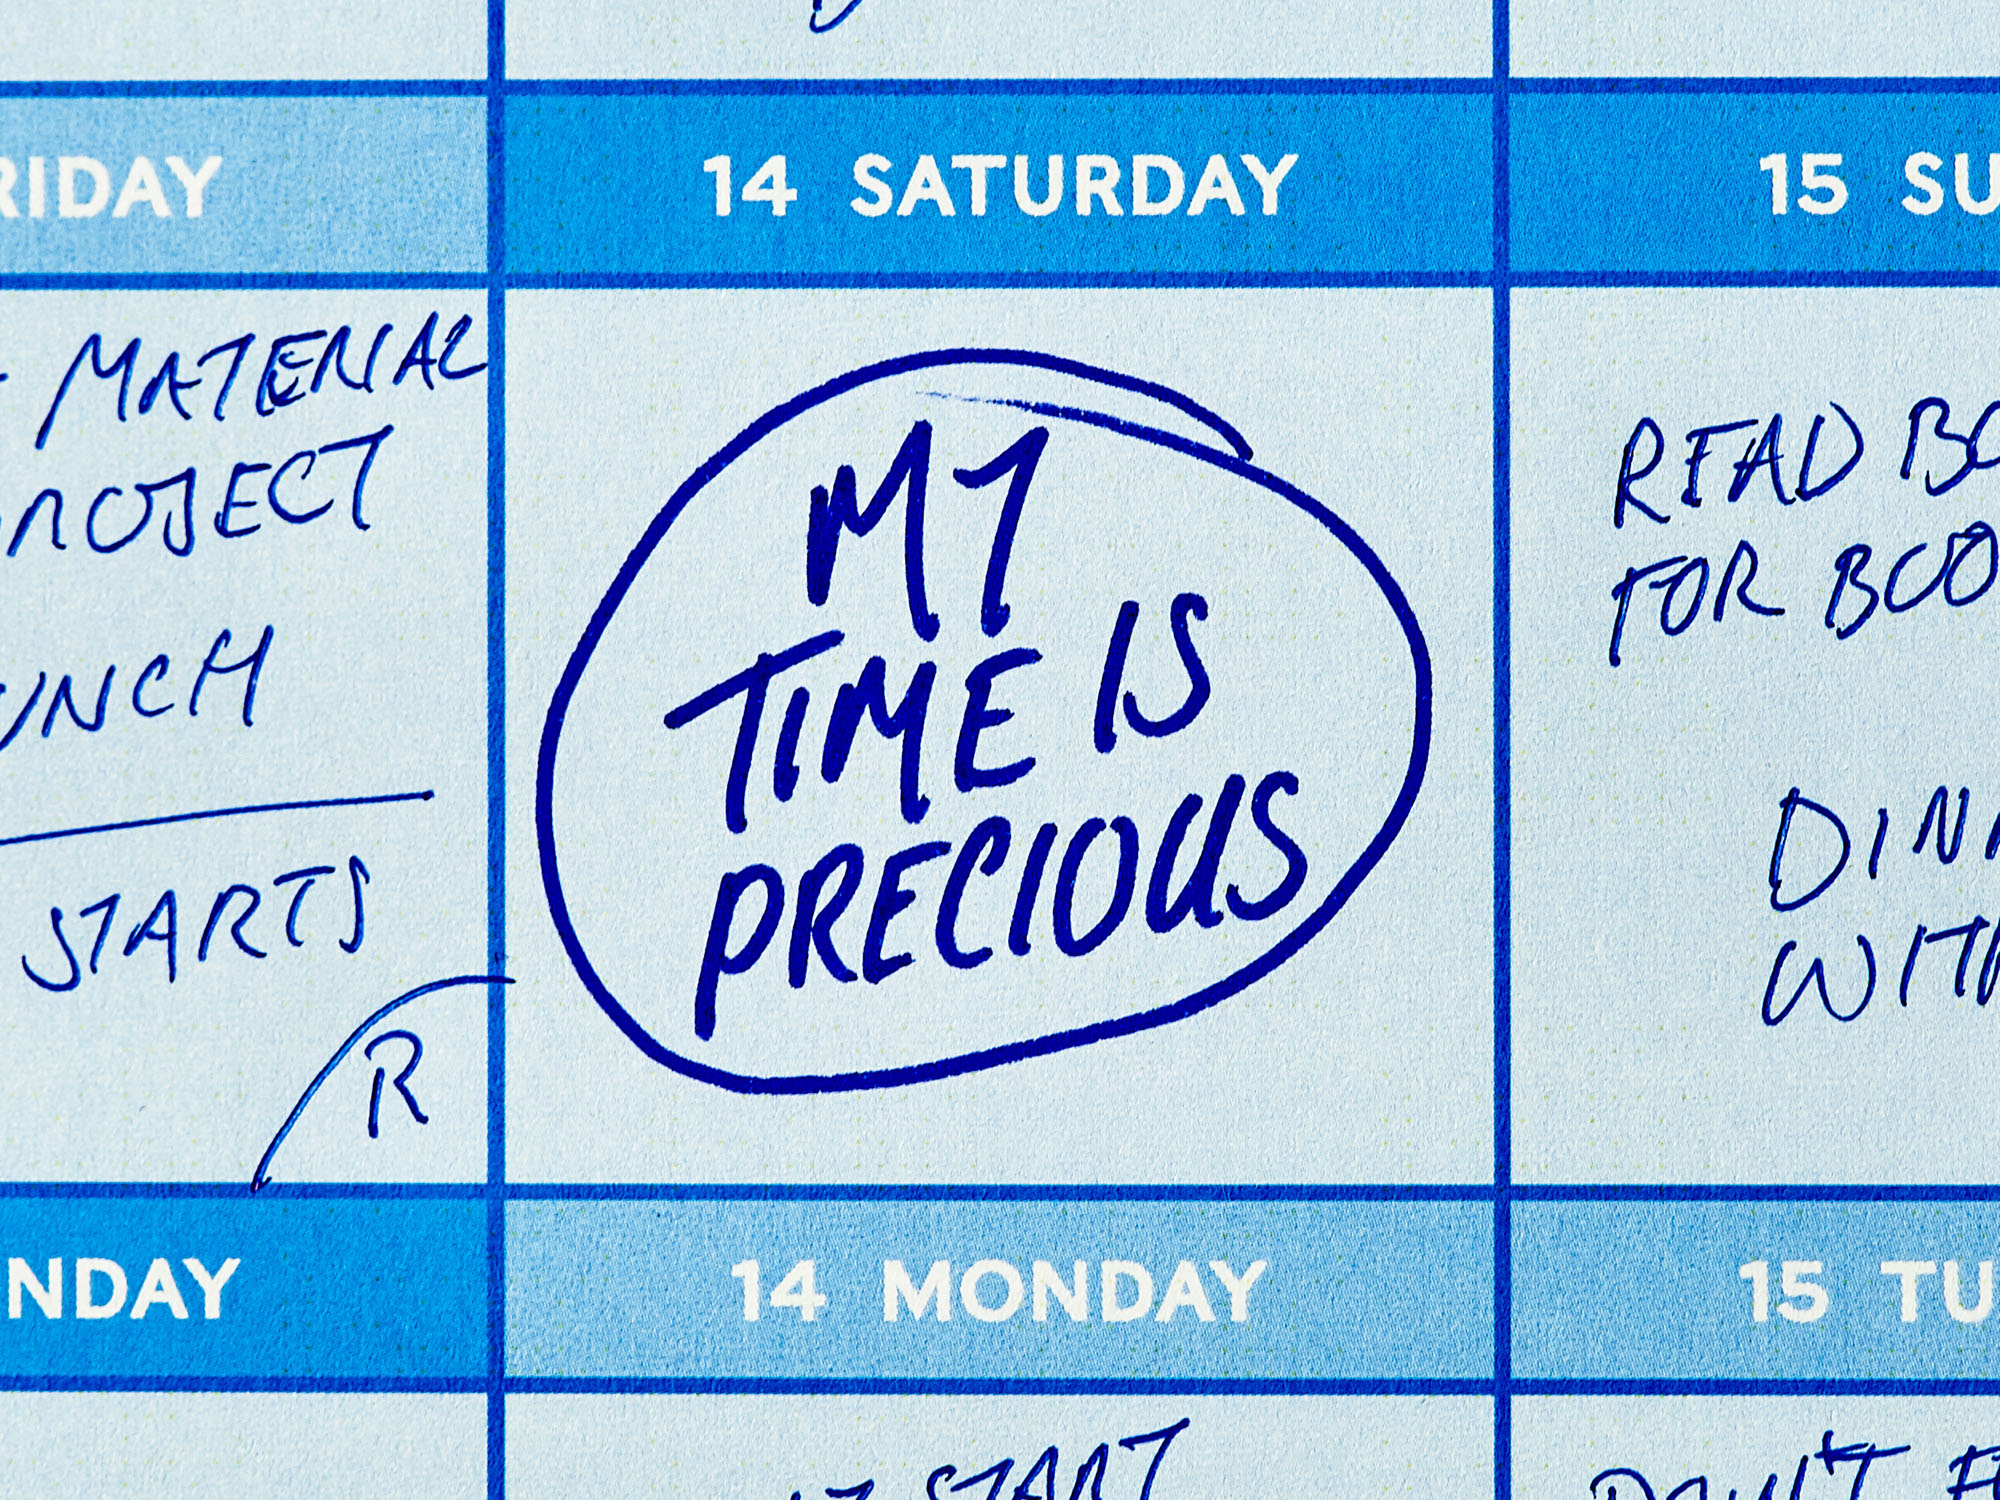 Release: My time is precious.